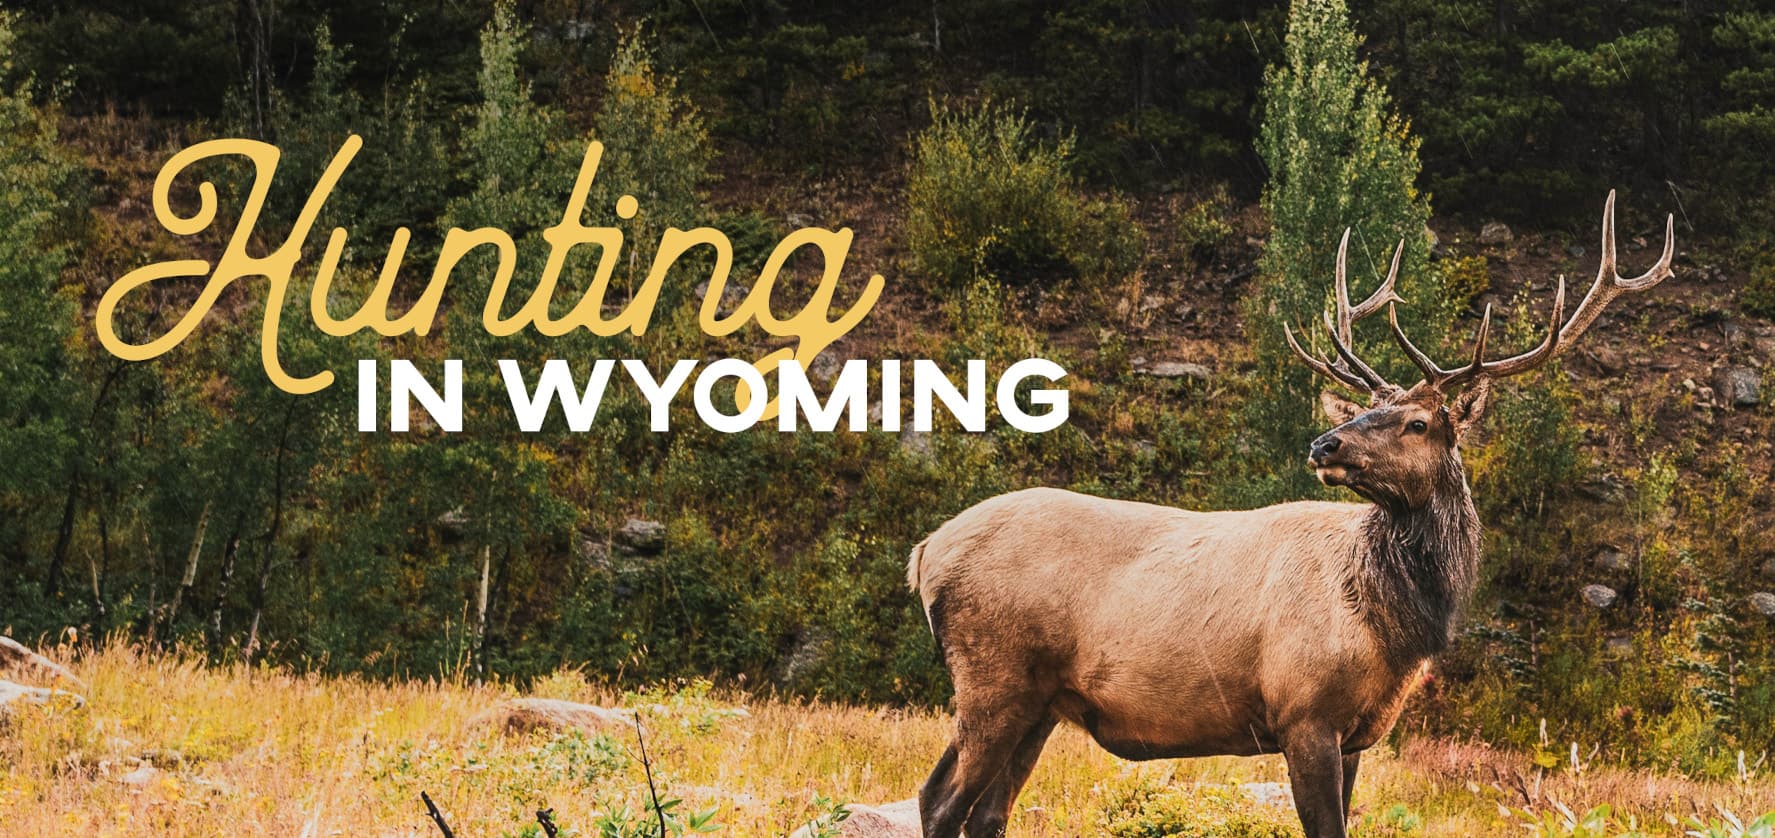 The words Hunting in Wyoming over an image of a moose standing in a field and a forest of trees in the background.